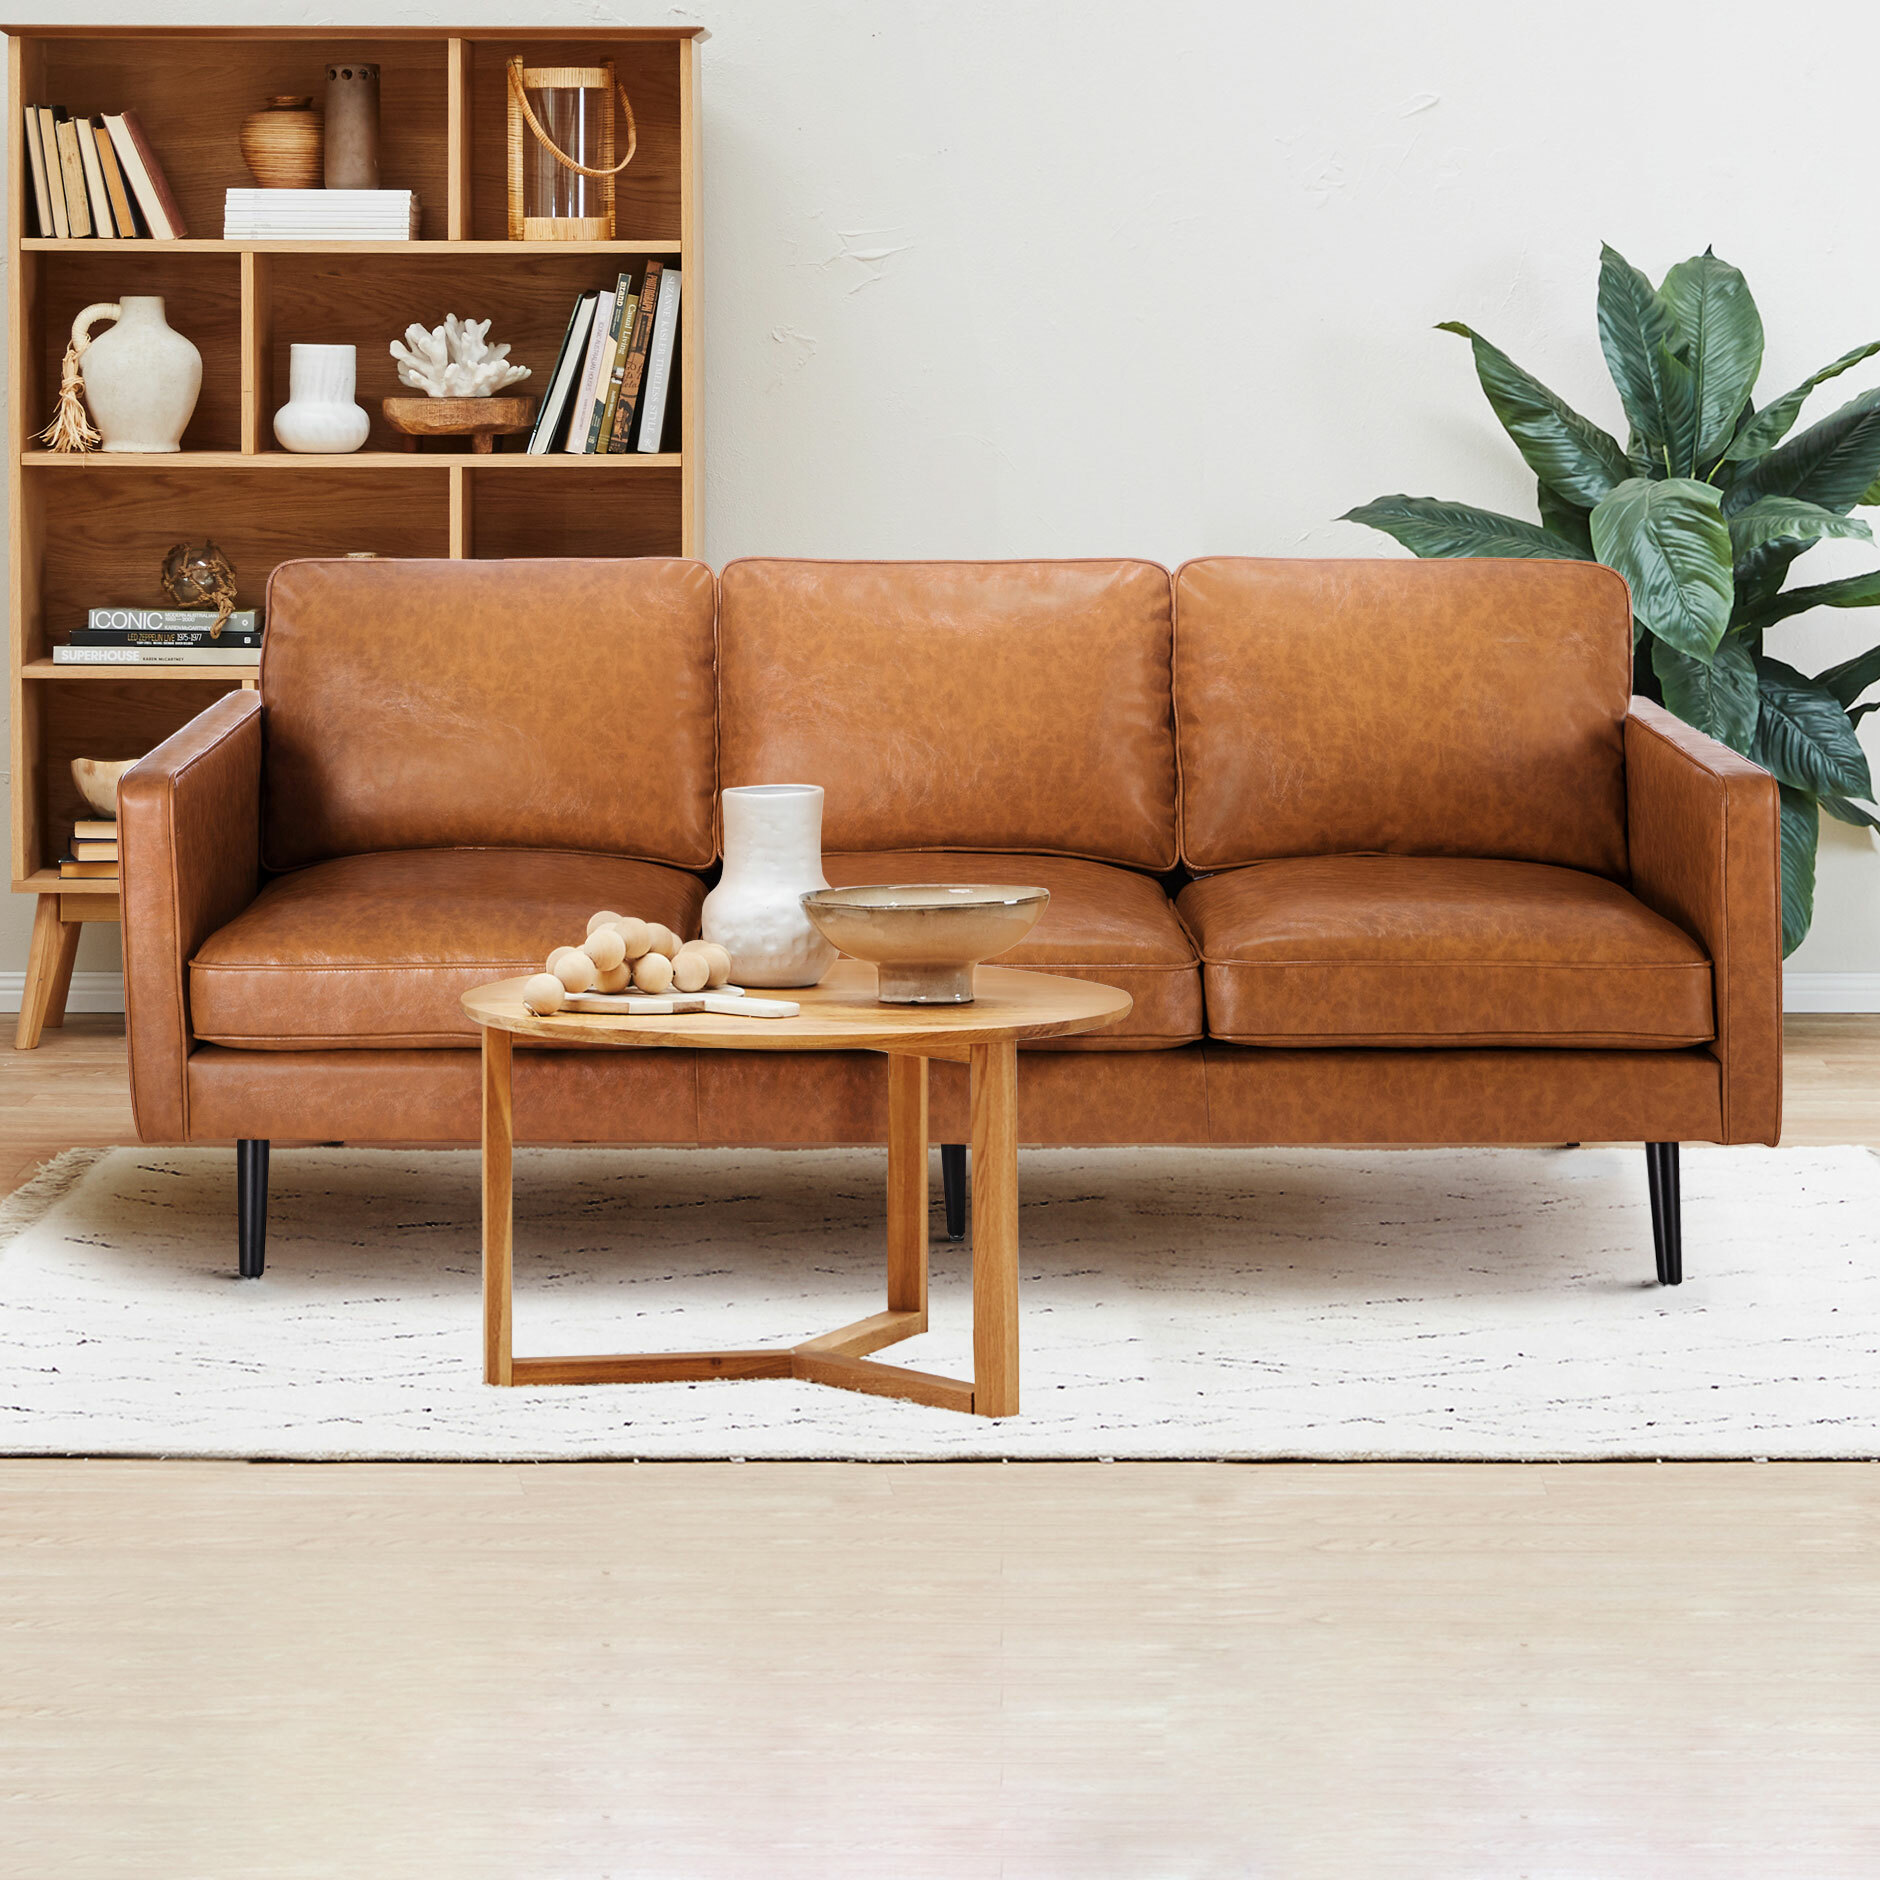 Temple Webster Tan Carlo Faux Leather, Vintage Leather Sofa Melbourne